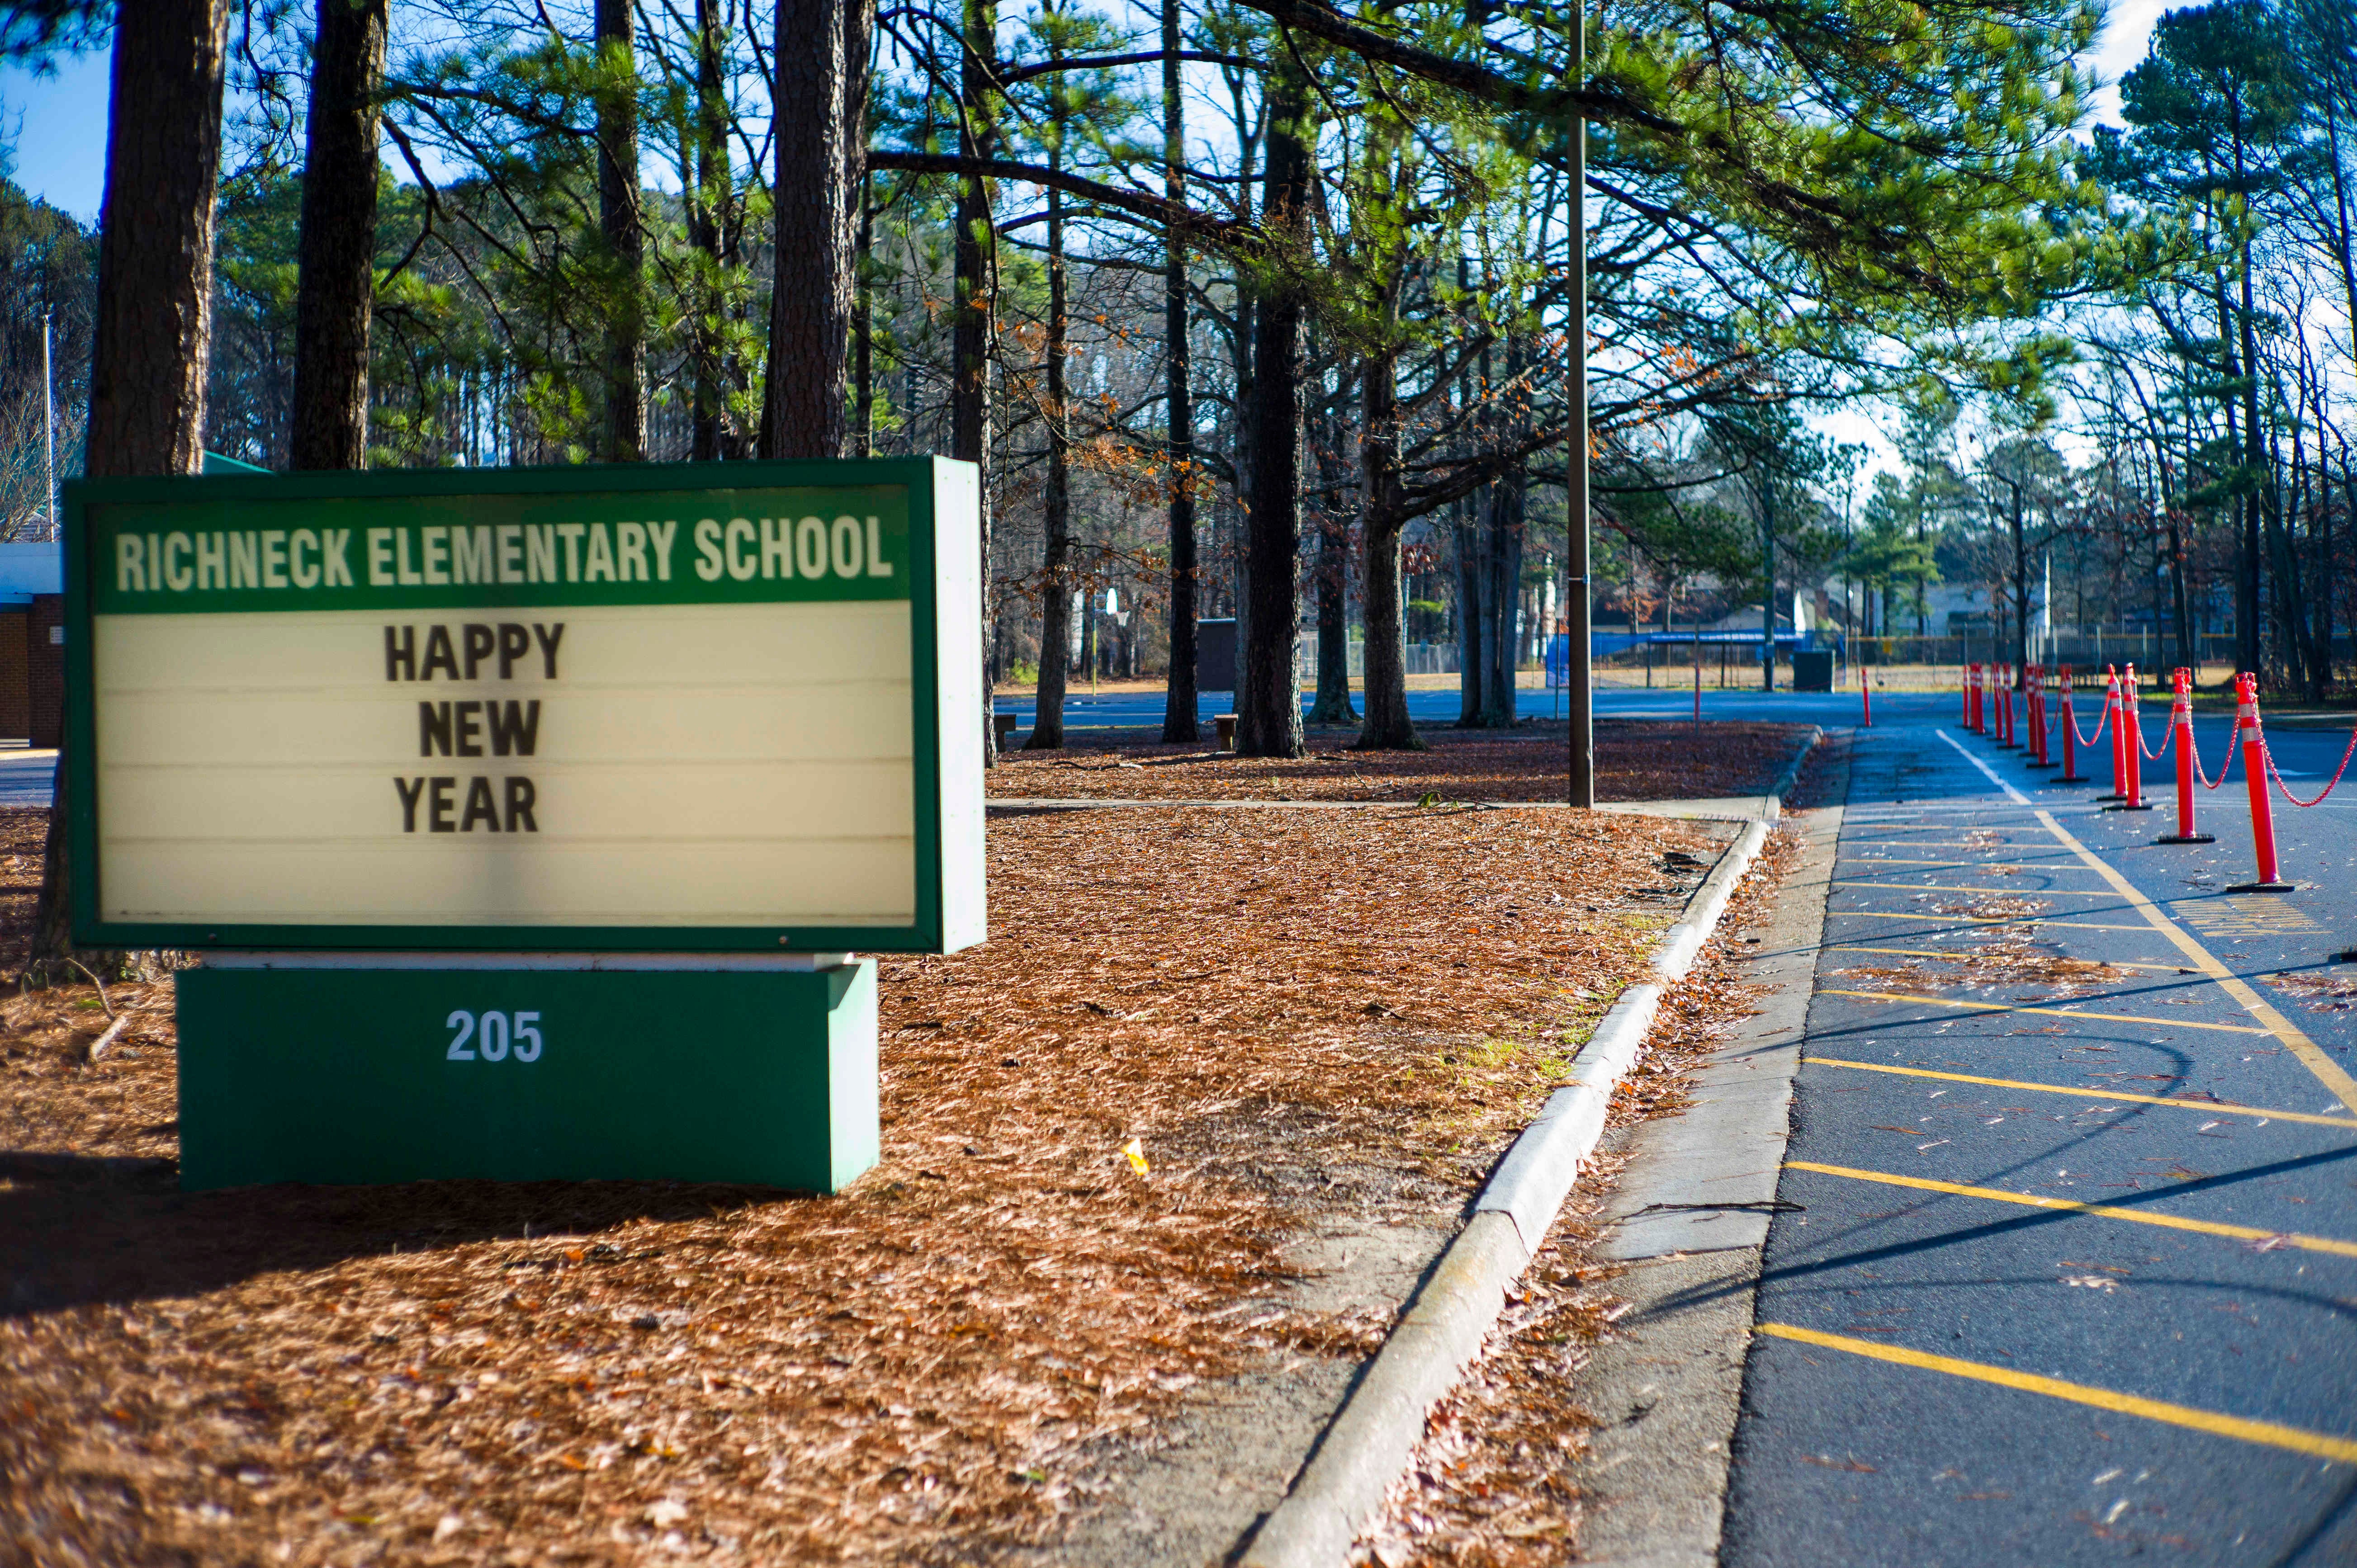 The shooting happened on 6 January at Richneck Elementary School in Newport News, Virginia